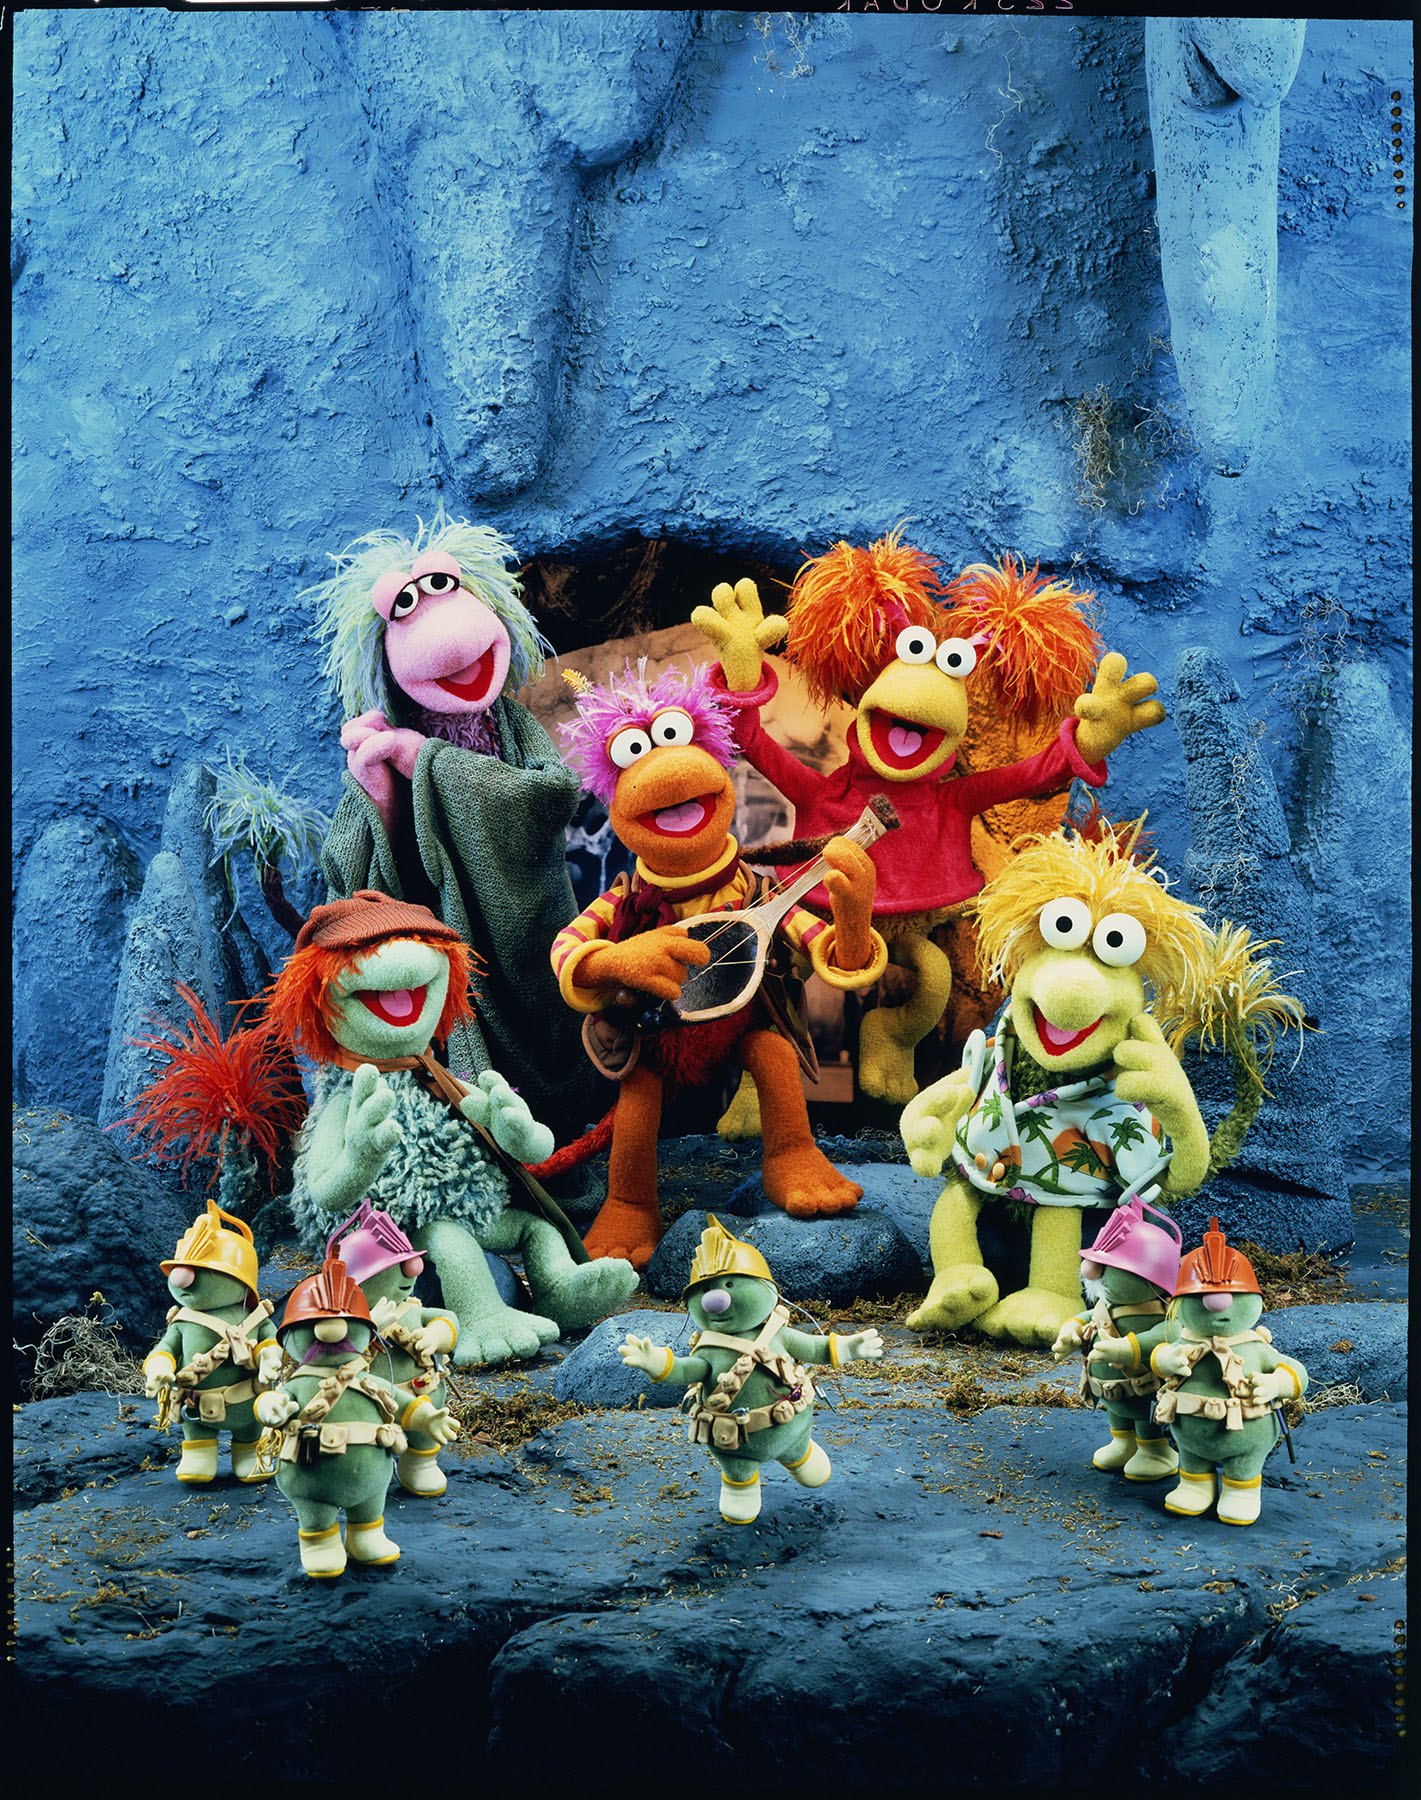 The Fraggles from Fraggle Rock